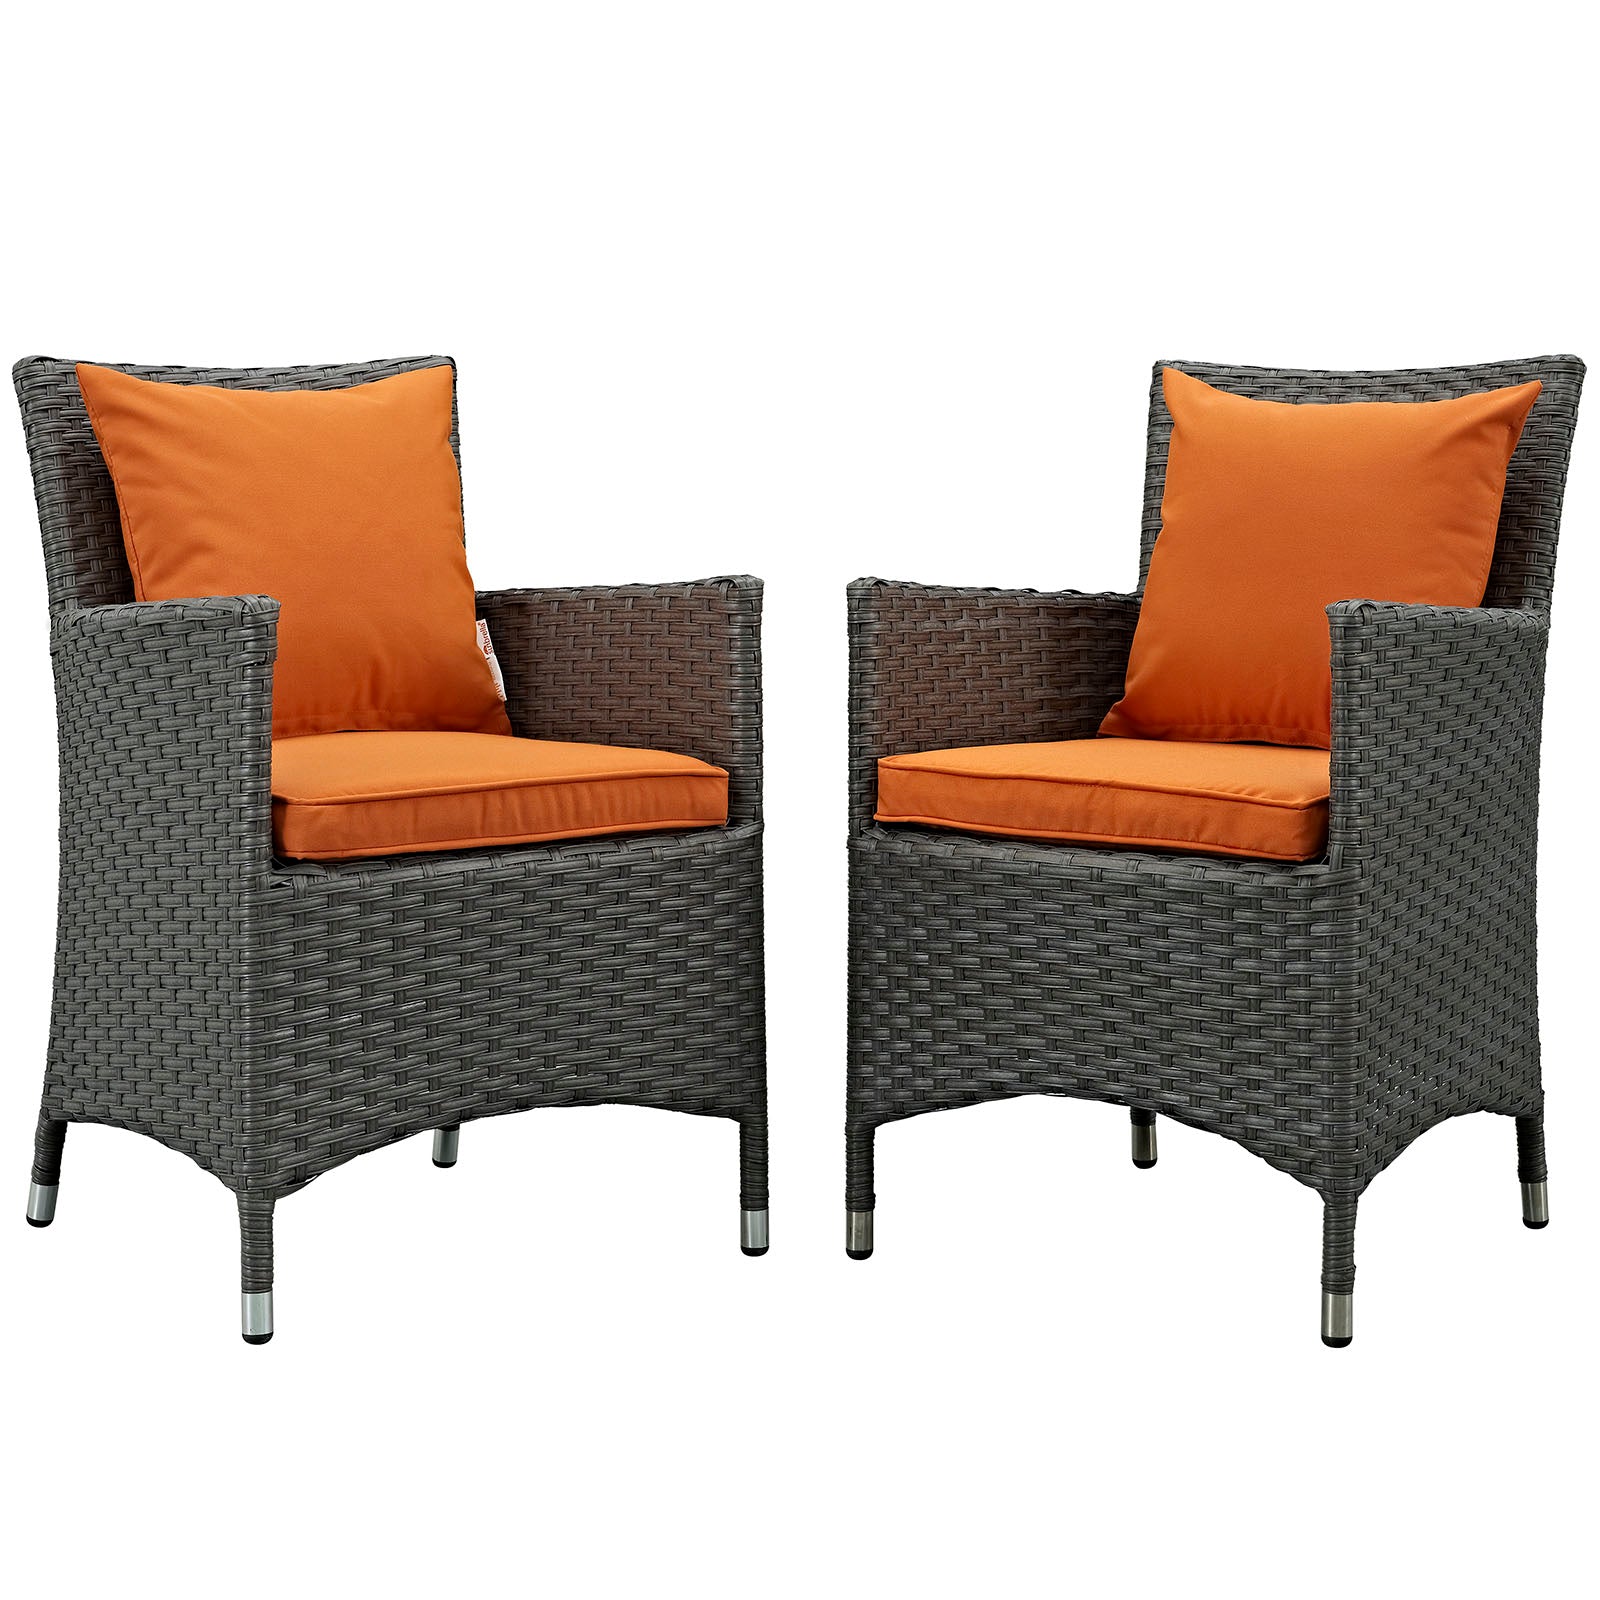 Sojourn 2 Piece Outdoor Patio Sunbrella® Dining Set-Outdoor Dining Set-Modway-Wall2Wall Furnishings